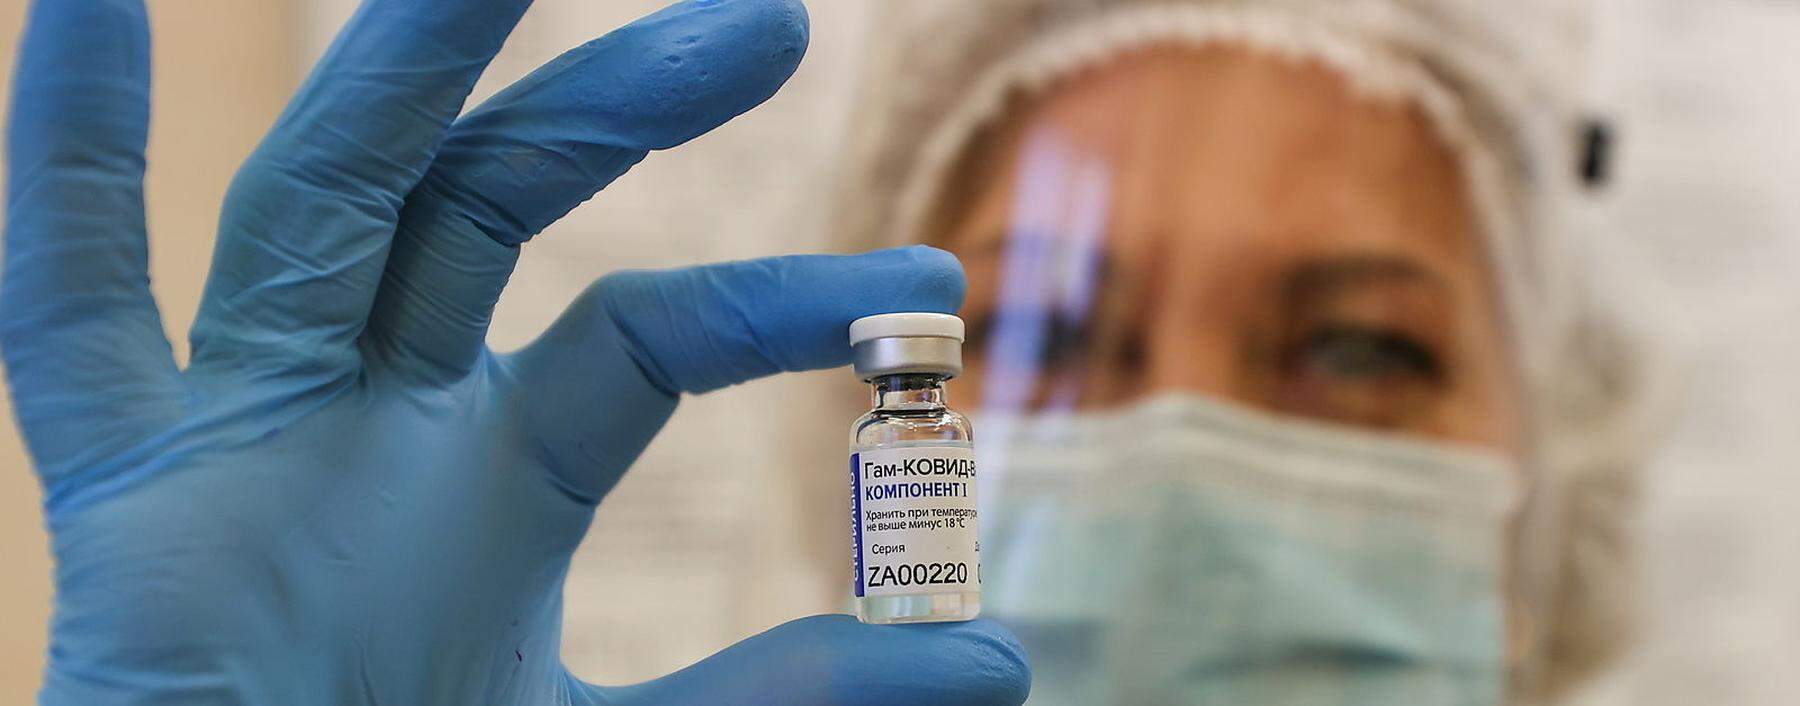 A medical worker demonstrates a vial with Sputnik V (Gam-COVID-Vac) vaccine during the vaccination against the coronavirus disease (COVID-19) at a clinic in Minsk